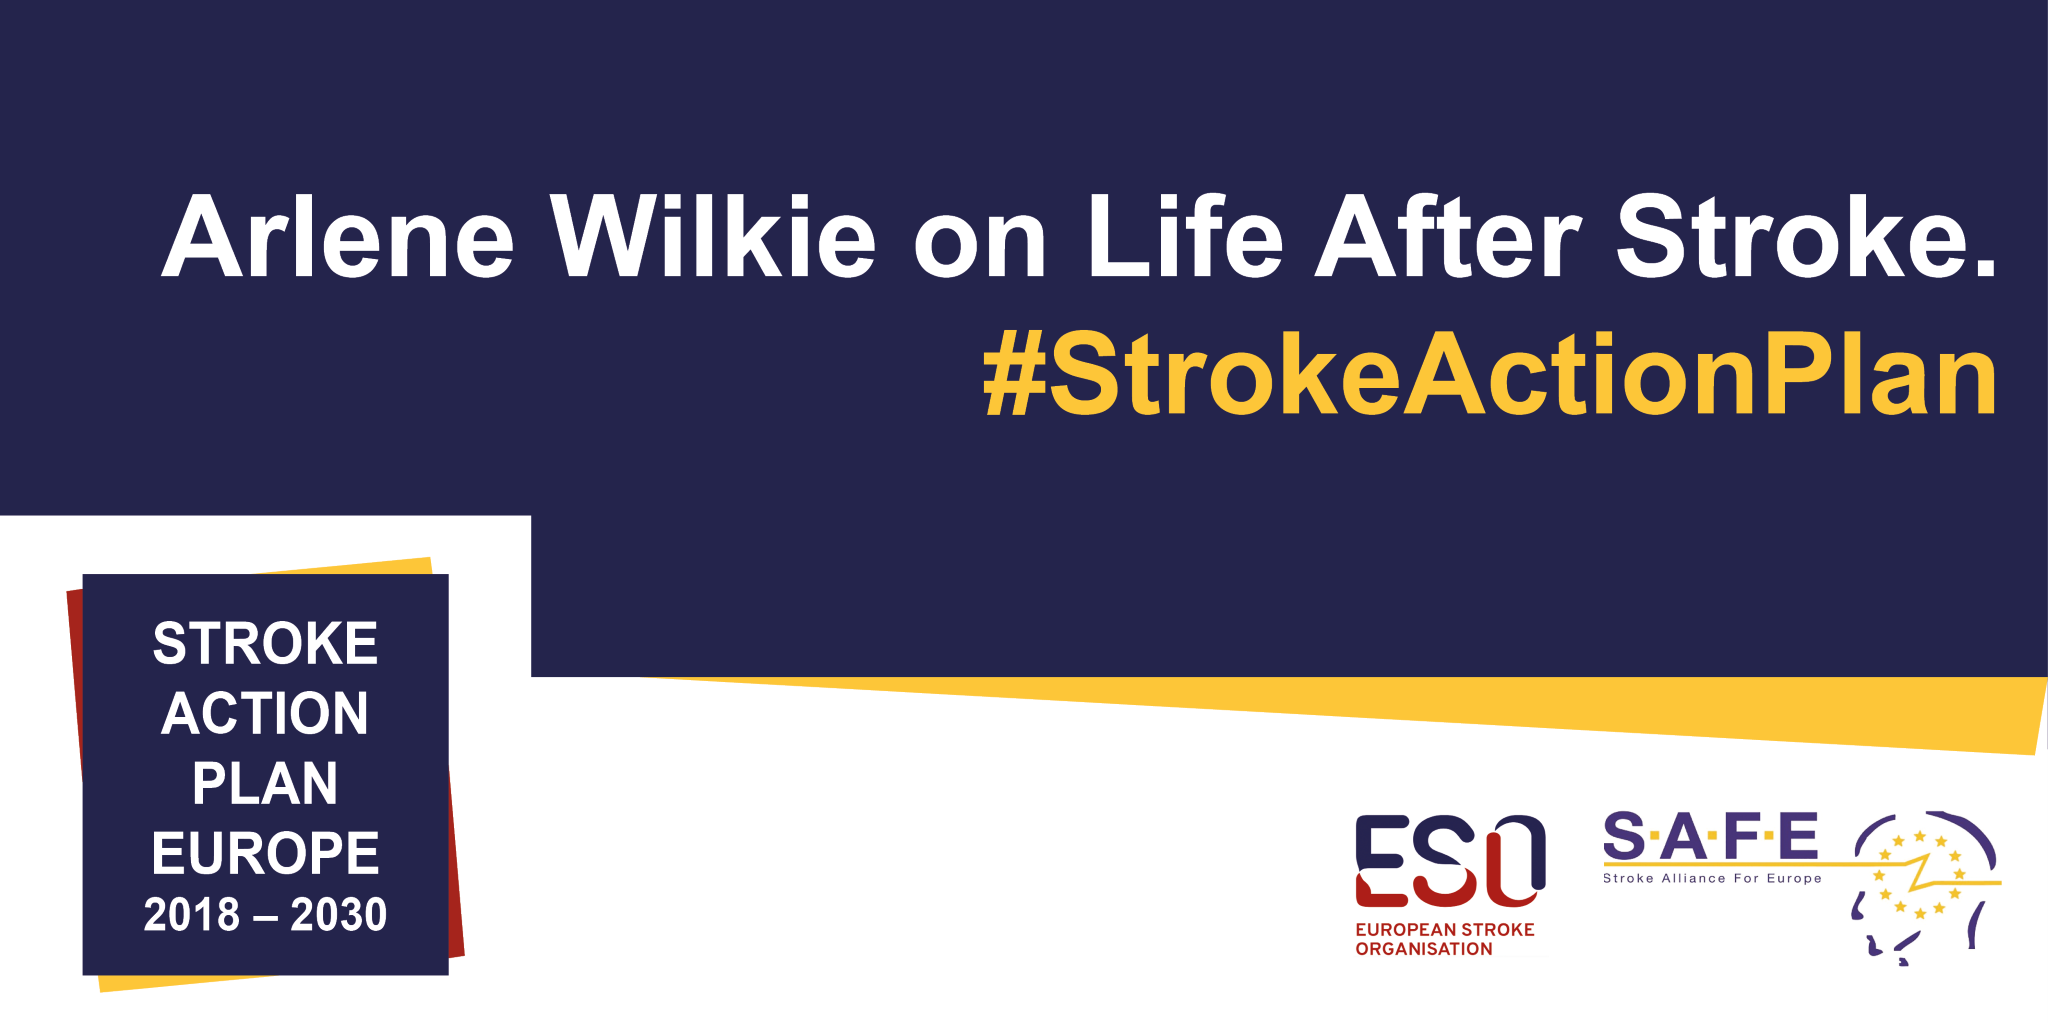 Arlene Wilkie highlights the importance of Life After Stroke